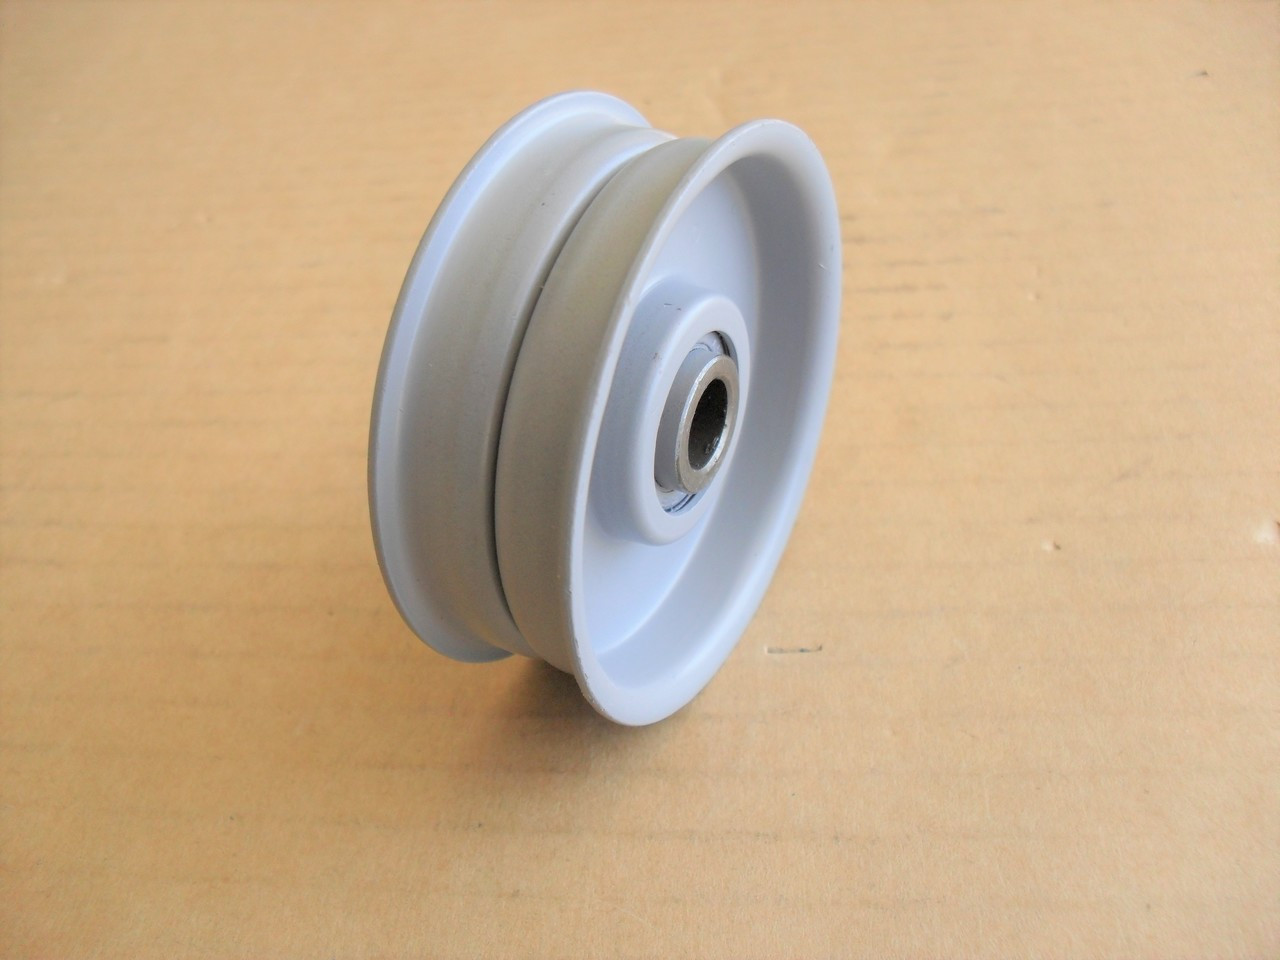 Flat Idler Pulley for White 1710566 ID: 3/8" OD: 2-1/2"